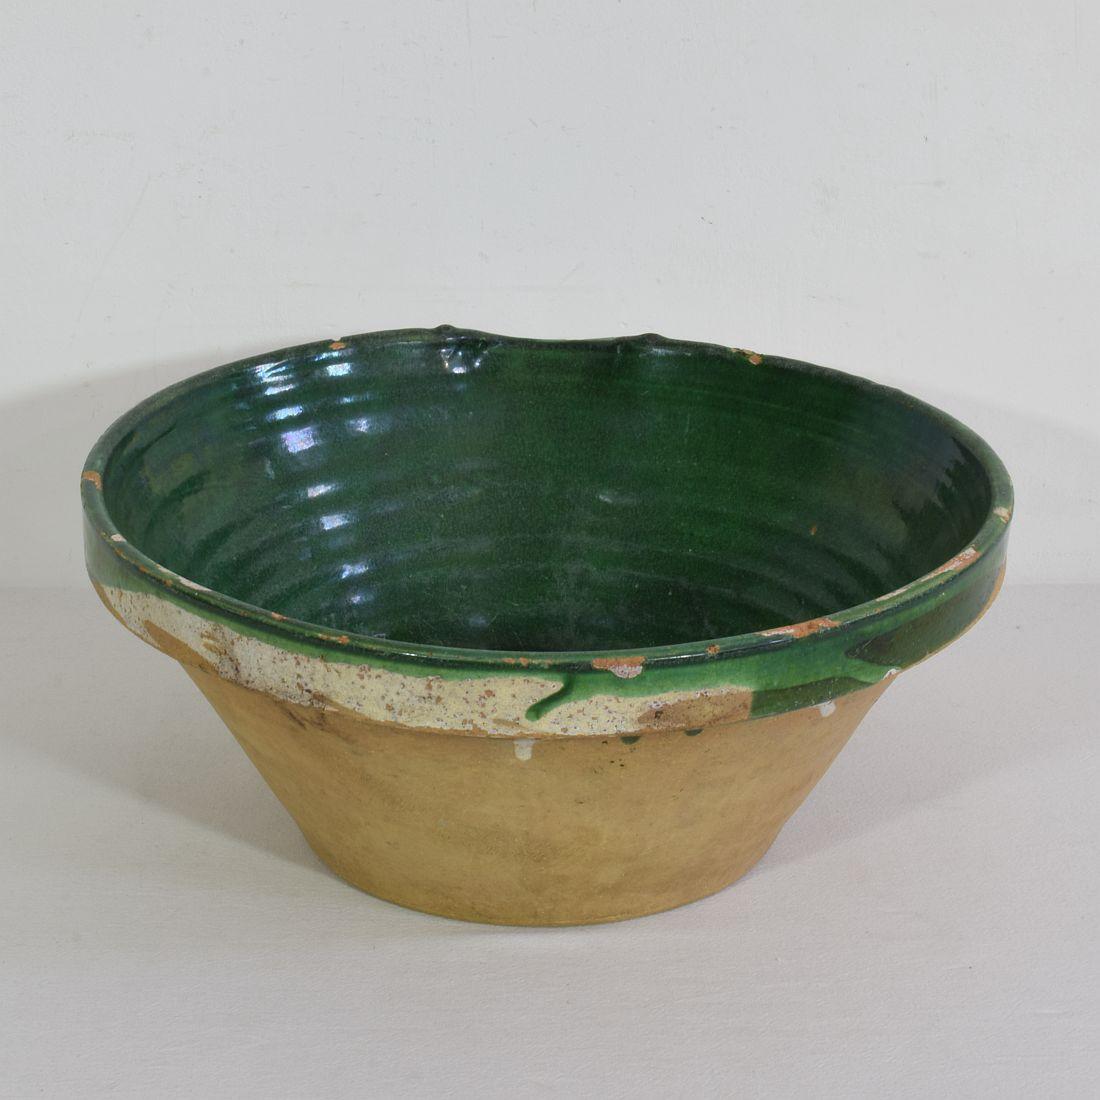 19th Century French Green Glazed Terracotta Dairy Bowl or Tian For Sale 1